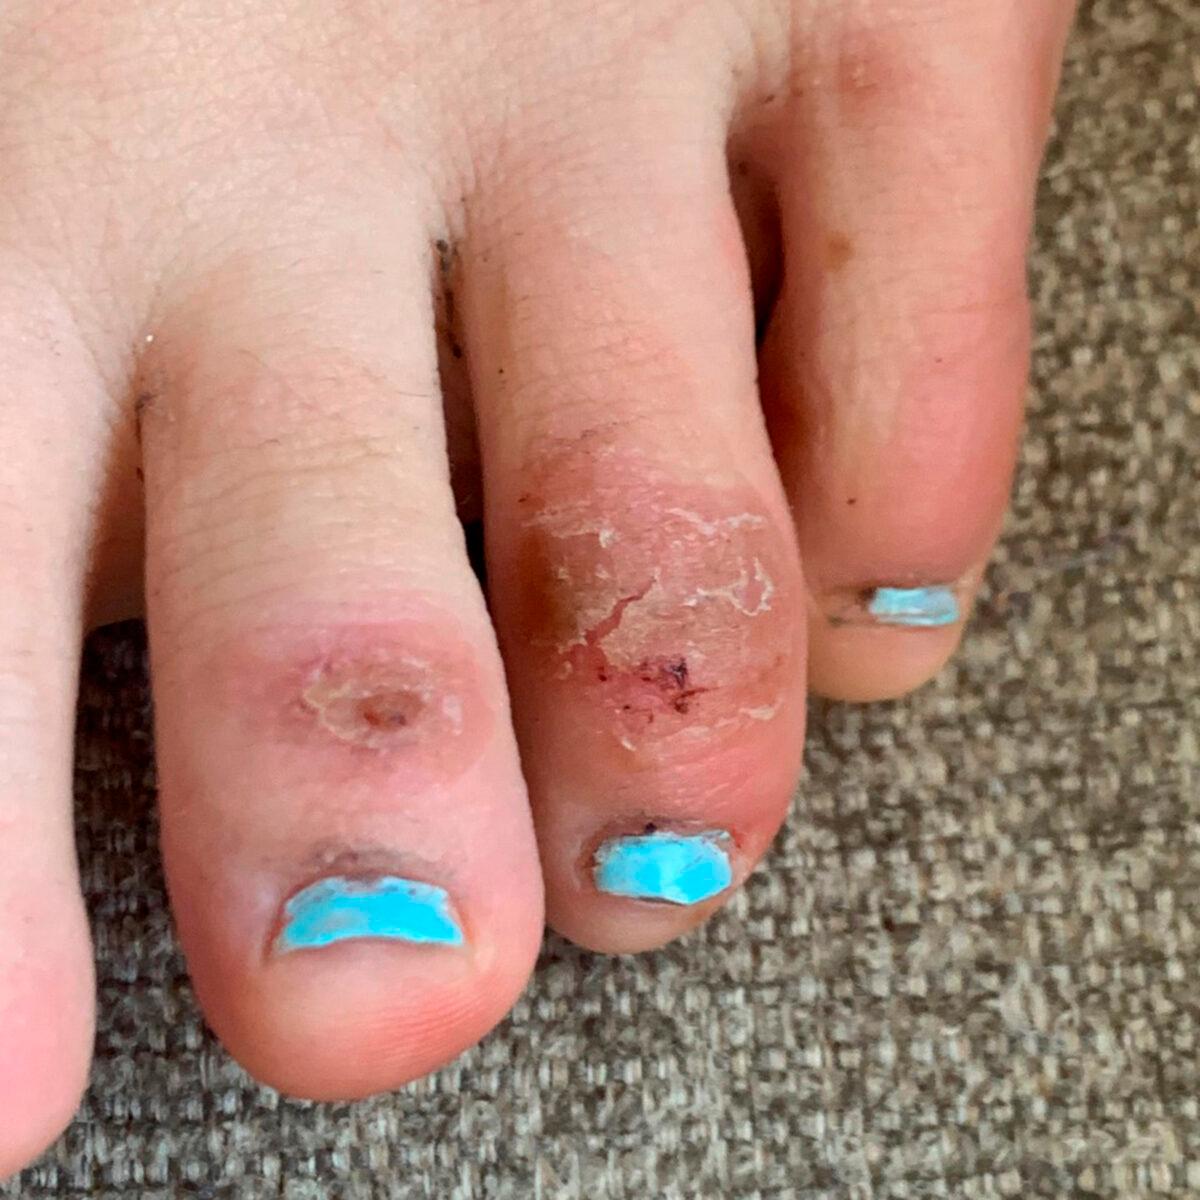 Discoloration on a teenage patient's toes 4 weeks after the onset of the condition informally called "COVID toes" on April 21, 2020. (Courtesy of Dr. Amy Paller/Northwestern University via AP)